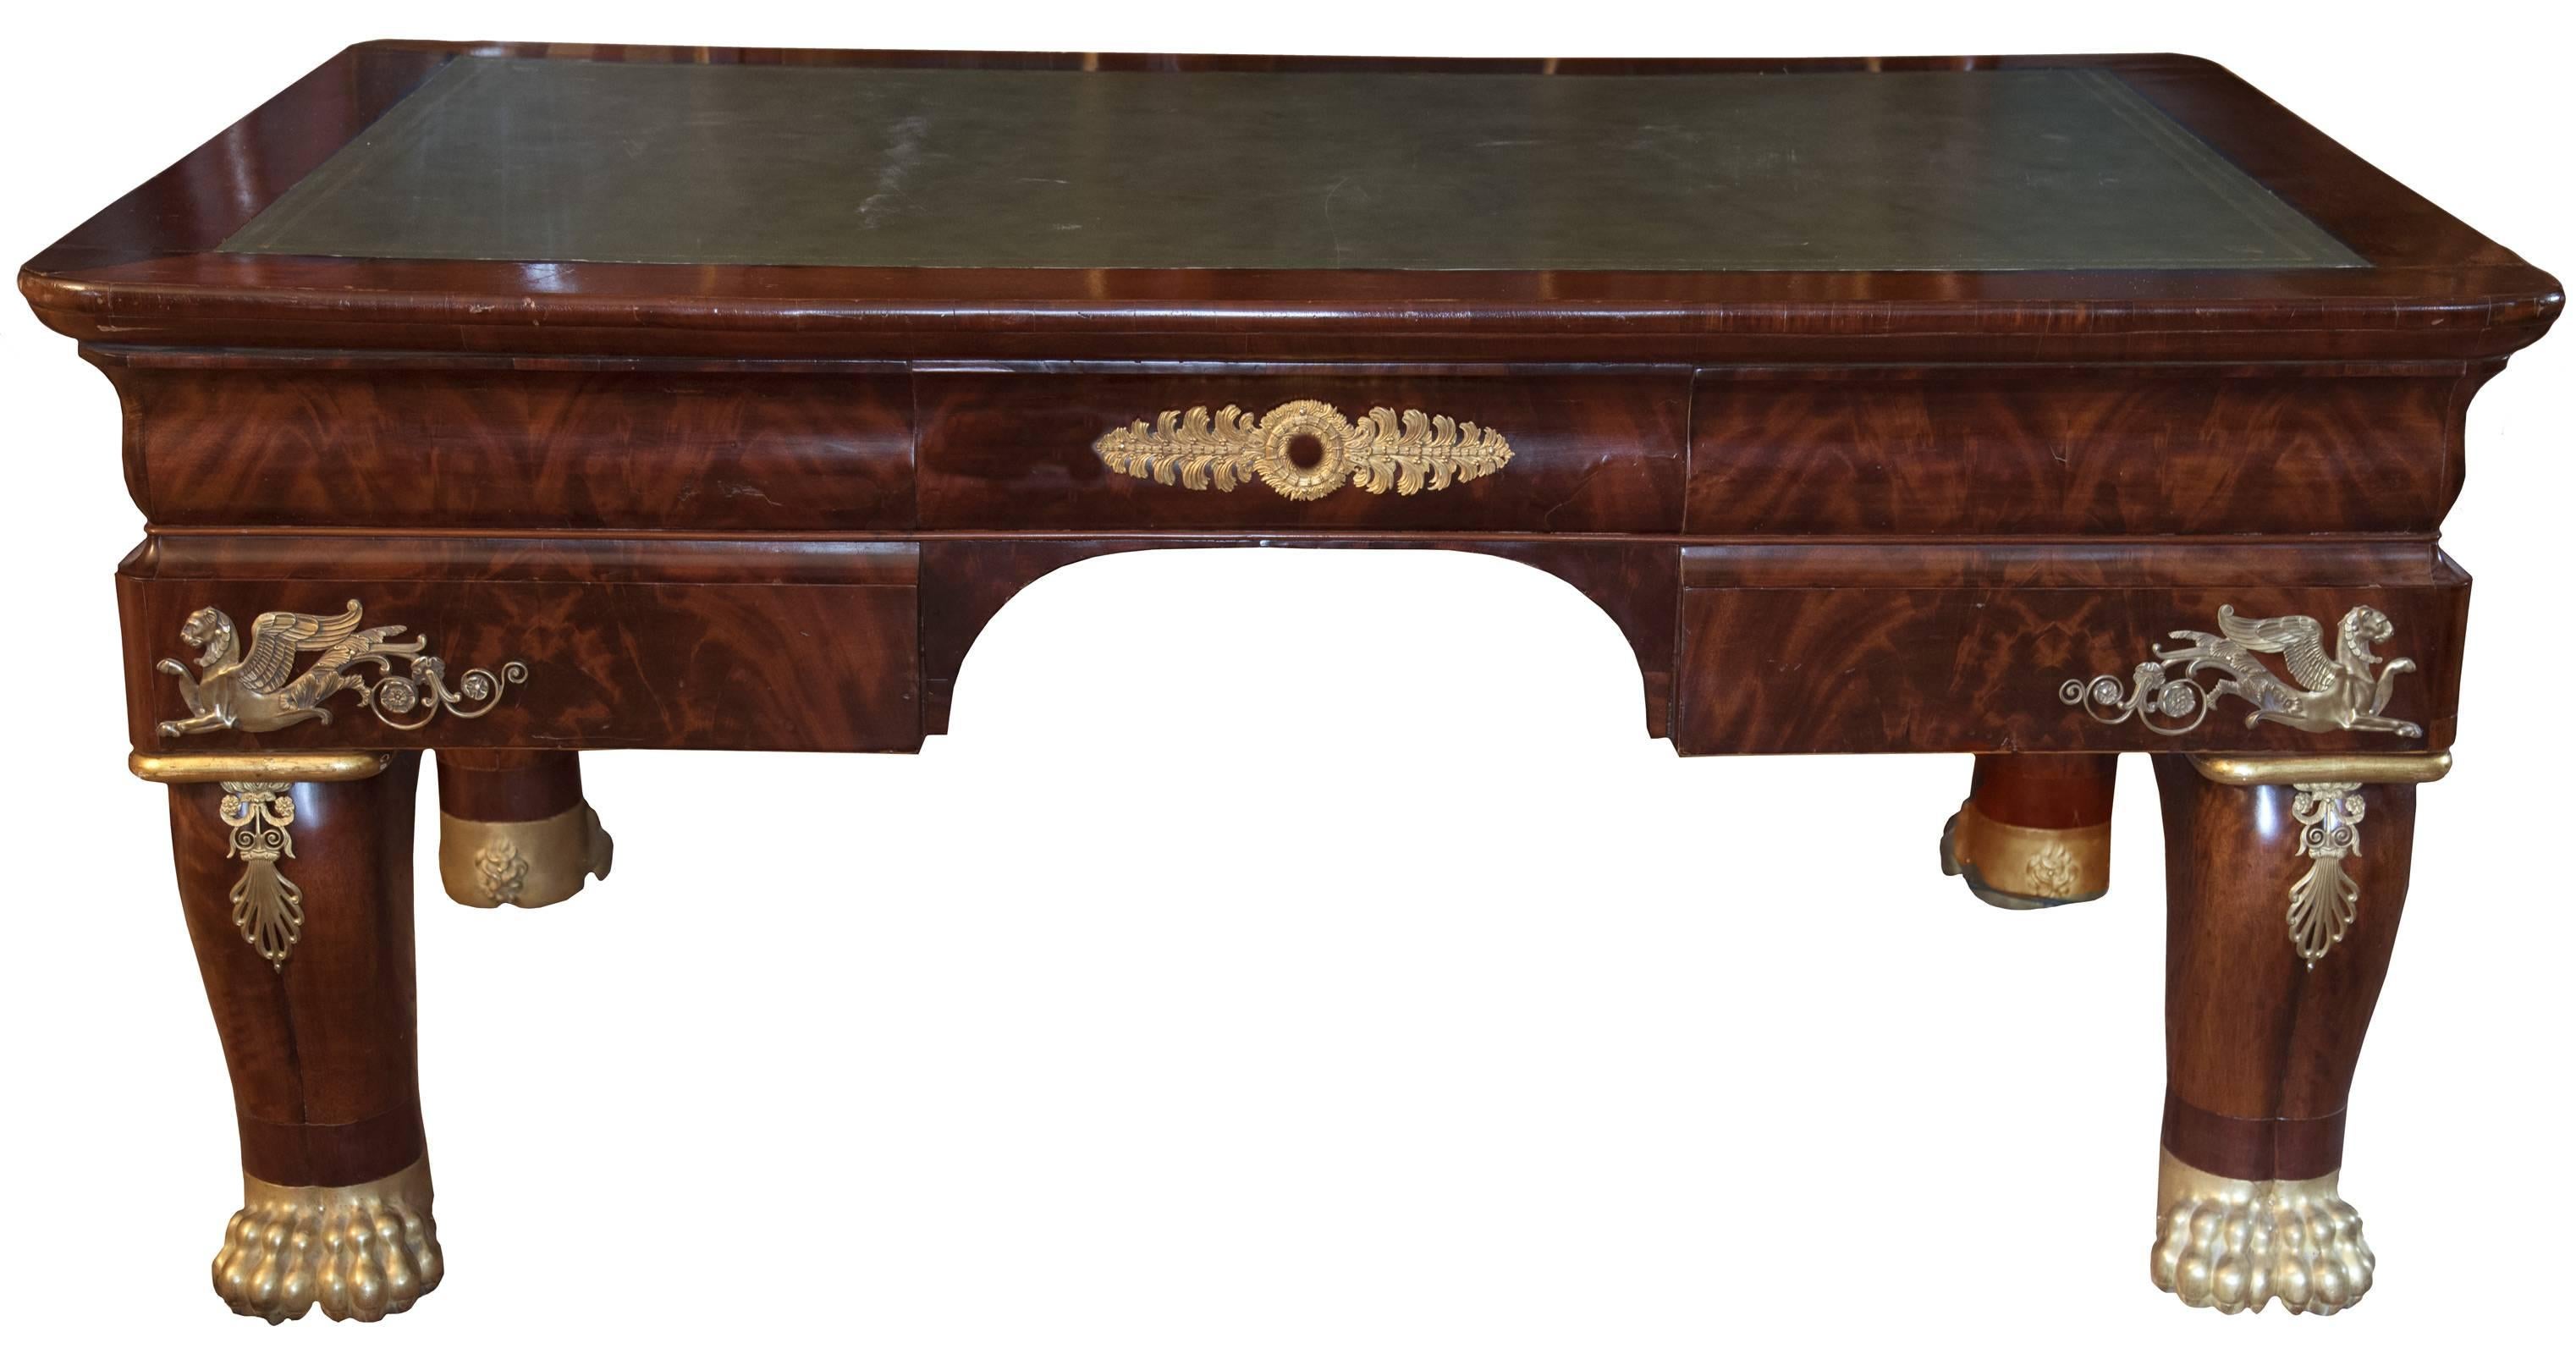 French Empire Style Mahogany Bureau Plat In Good Condition For Sale In Salt Lake City, UT